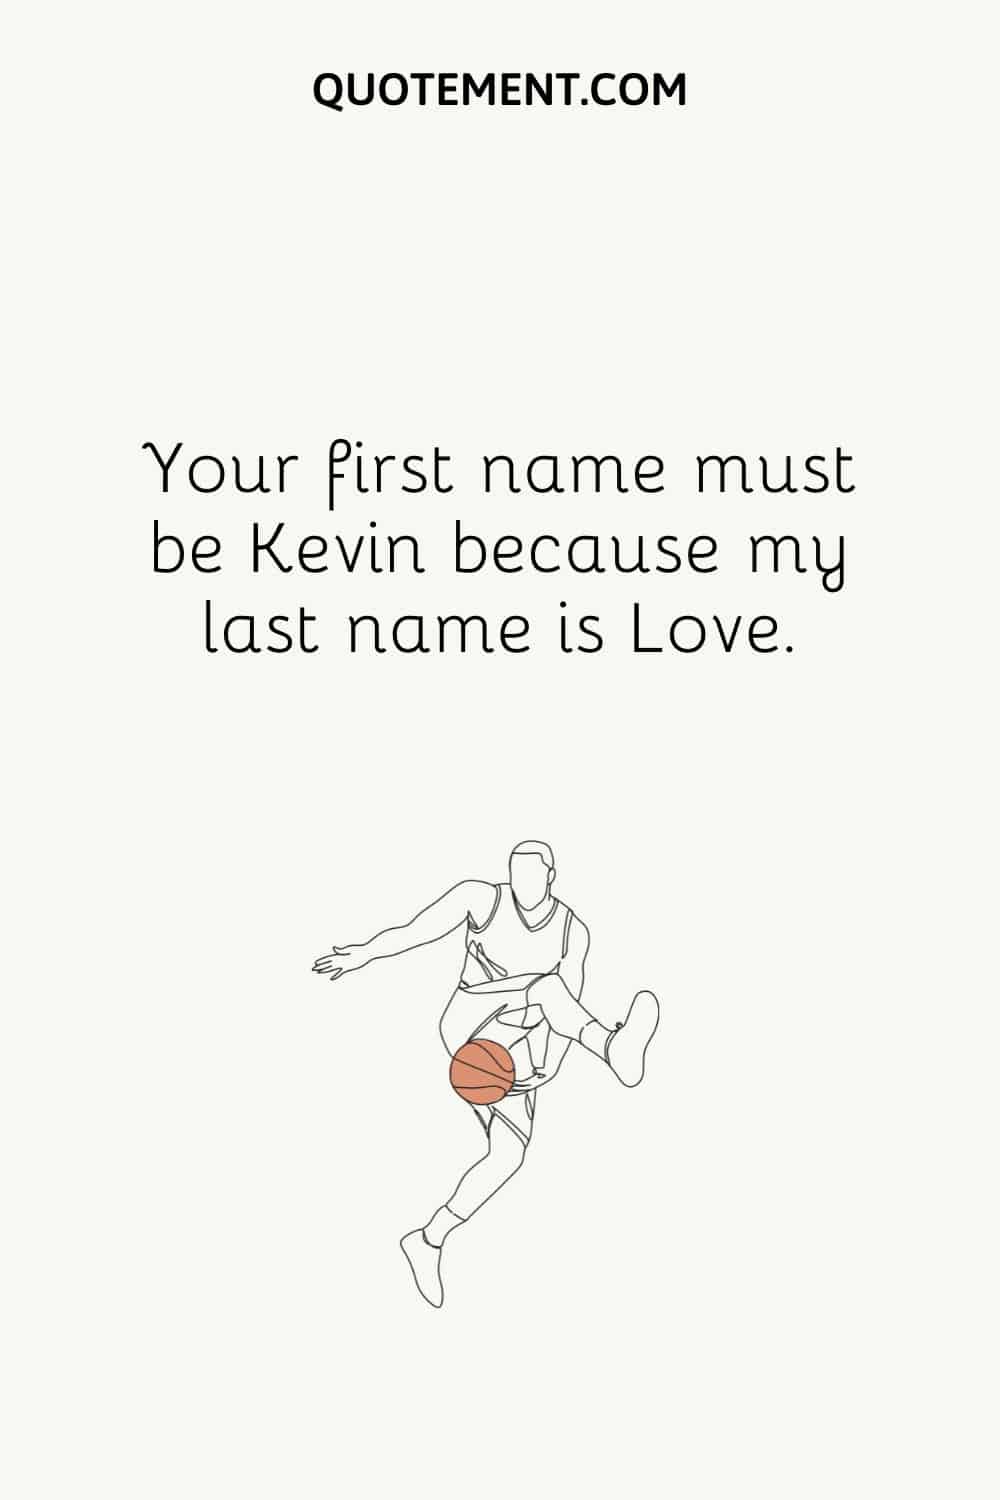 Your first name must be Kevin because my last name is Love